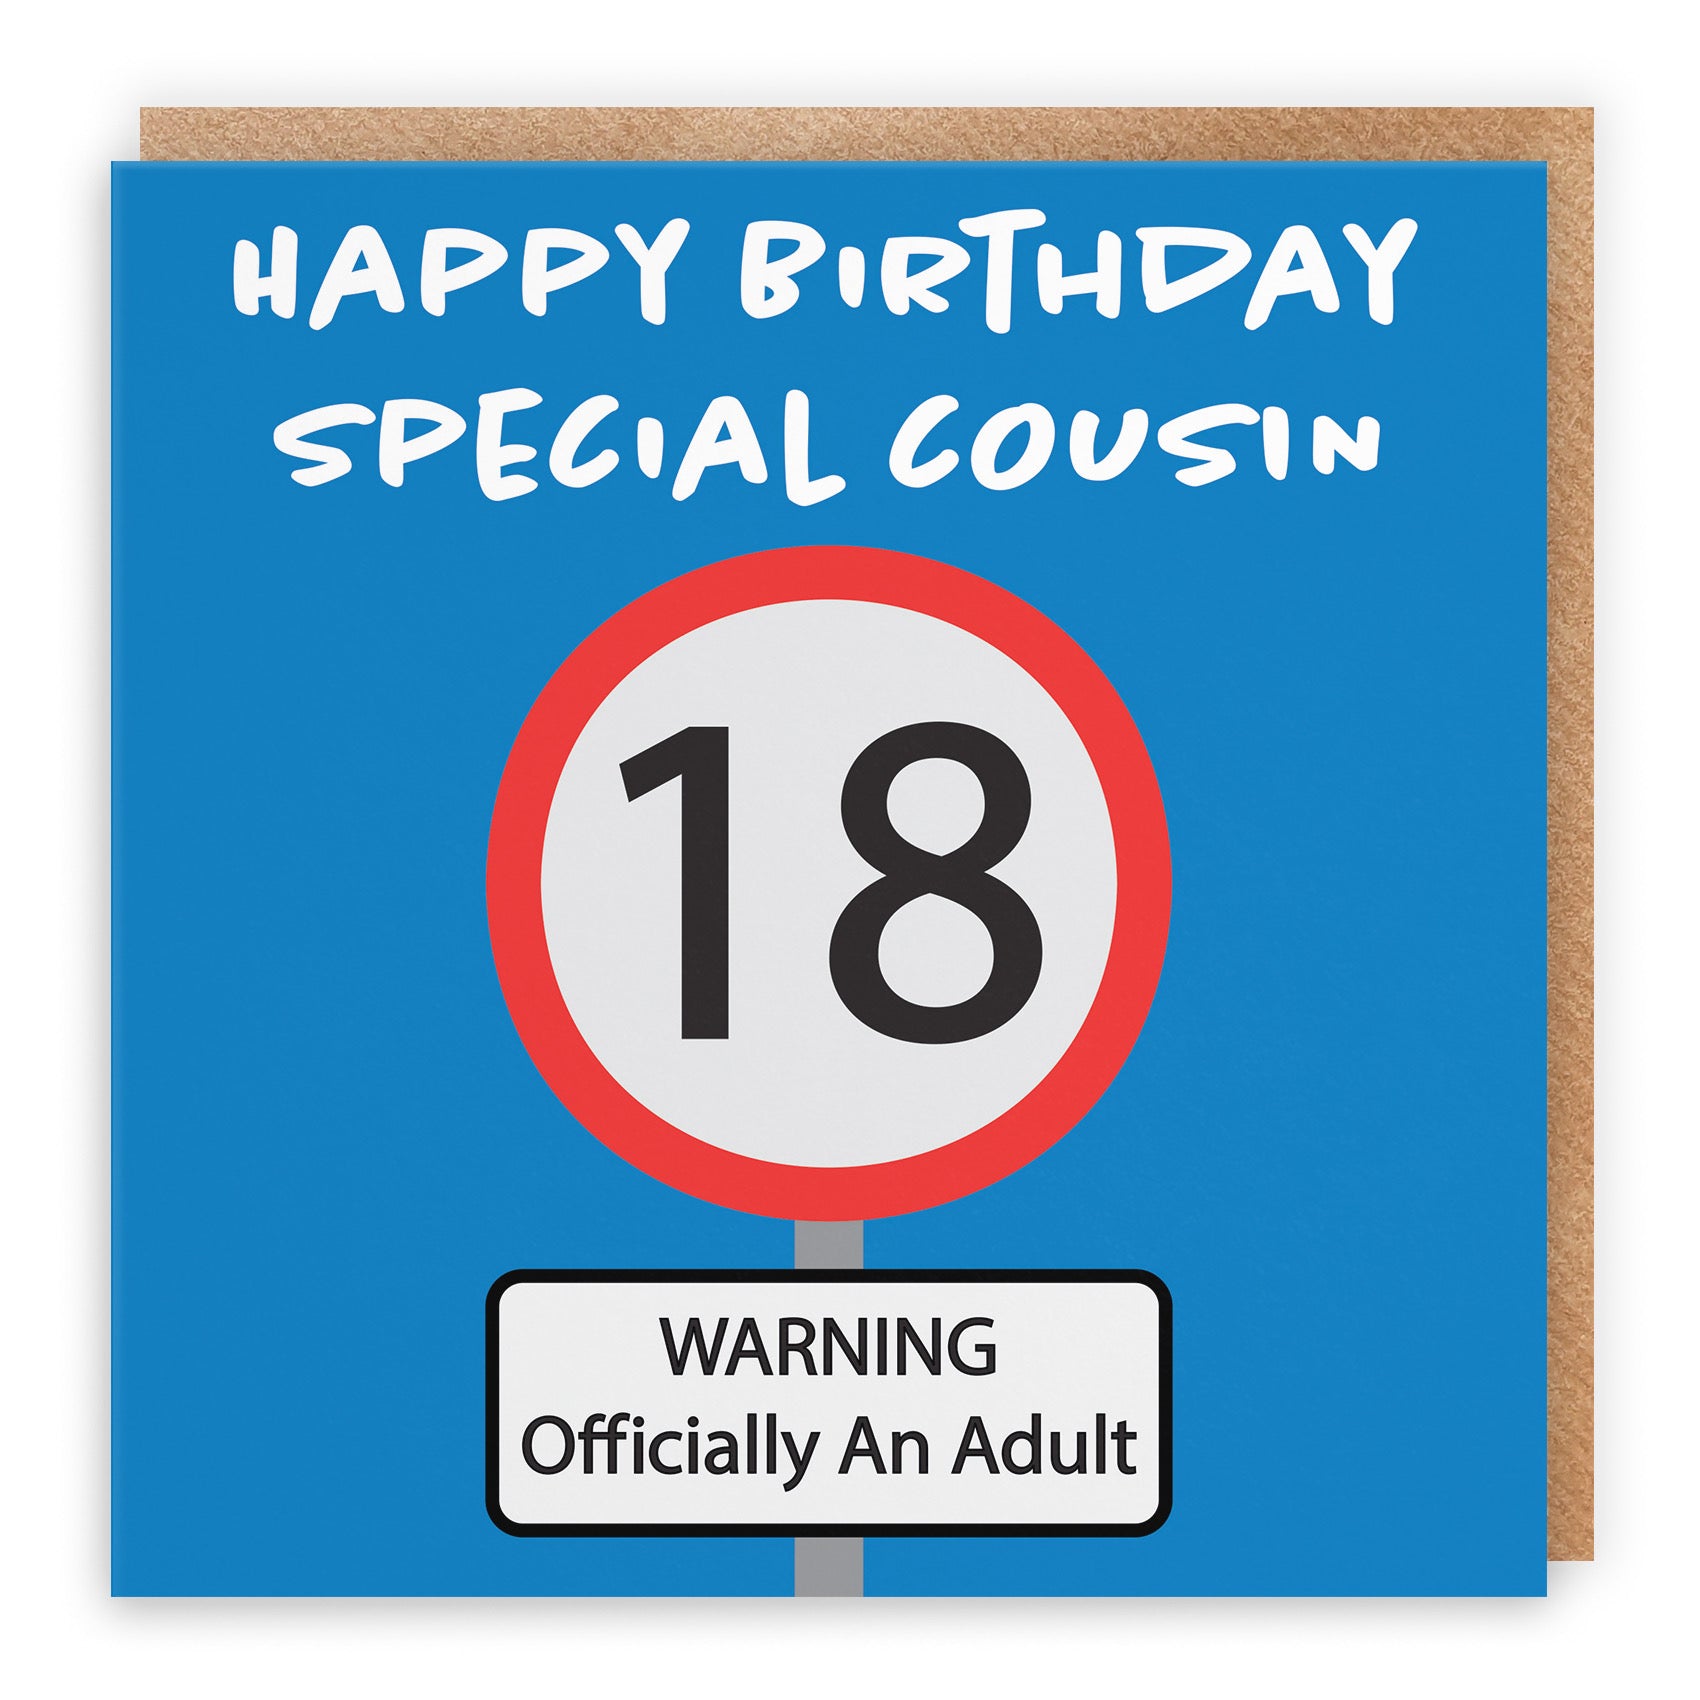 Large Cousin 18th Birthday Card Road Sign - Default Title (B0BPT41SG8)